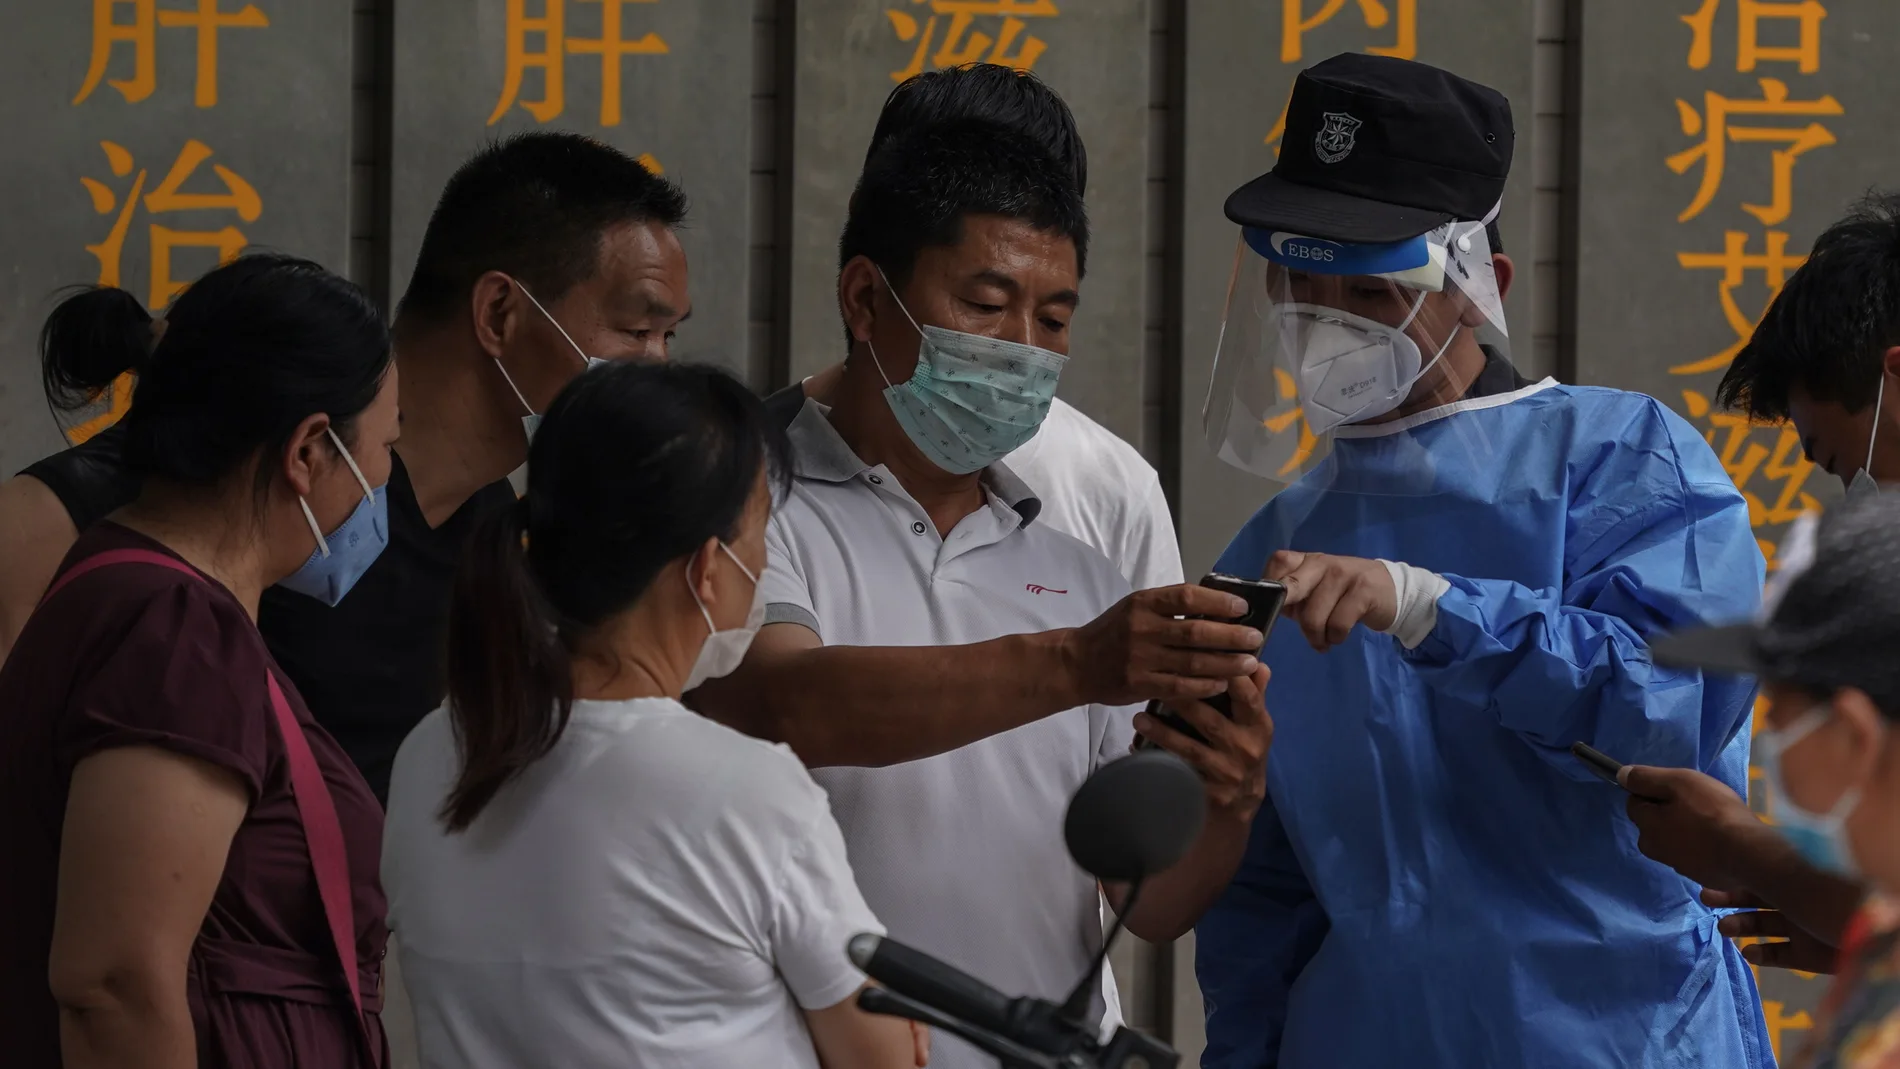 Beijing (China), 15/06/2020.- People who visited or live near Xinfadi Market as they use mobile phones to make an appointment for COVID-19 testing at Youan Hospital in Beijing, China, 15 June 2020. Beijing conducted COVID-19 tests on more than 76,000 people on 14 June. According to media reports, over 50 people tested positive for COVID-19 on 14 June. EFE/EPA/STRINGER